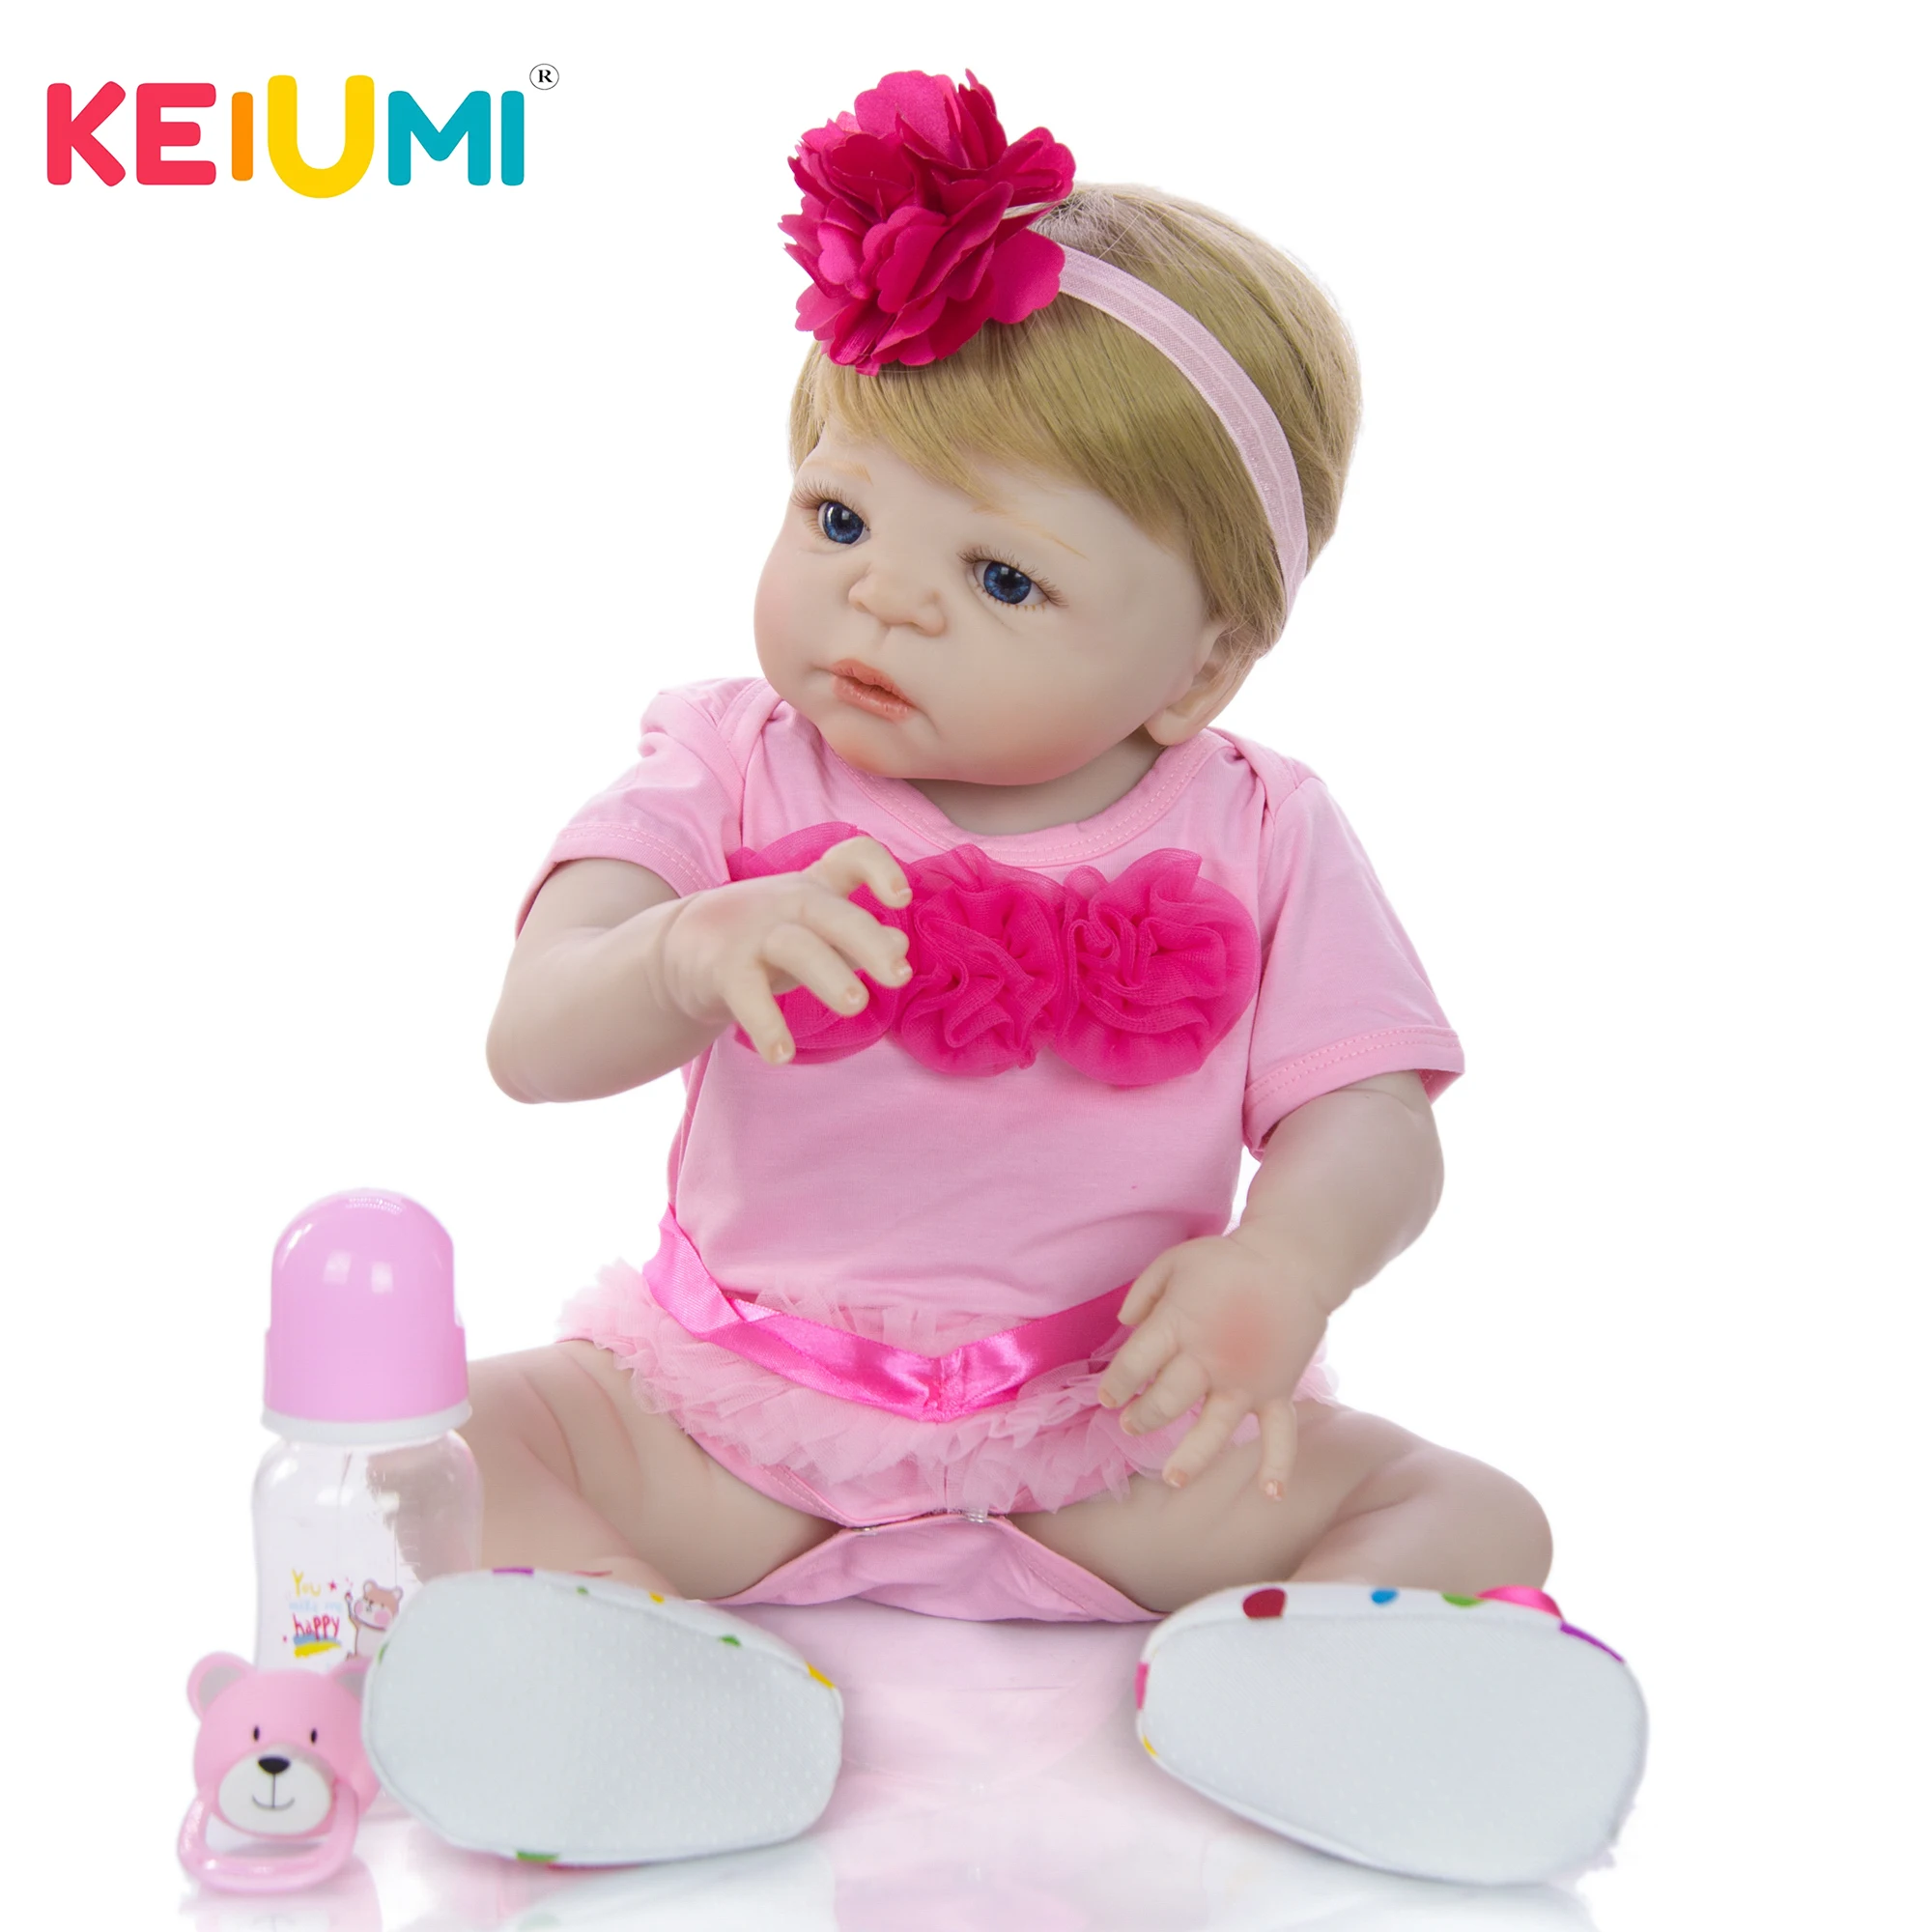 

KEIUMI Lovely 23 Inch Baby Reborn Full Silicone 57 cm Newborn Baby Doll Lifelike Simulation Doll Toy For Children's Day Gift